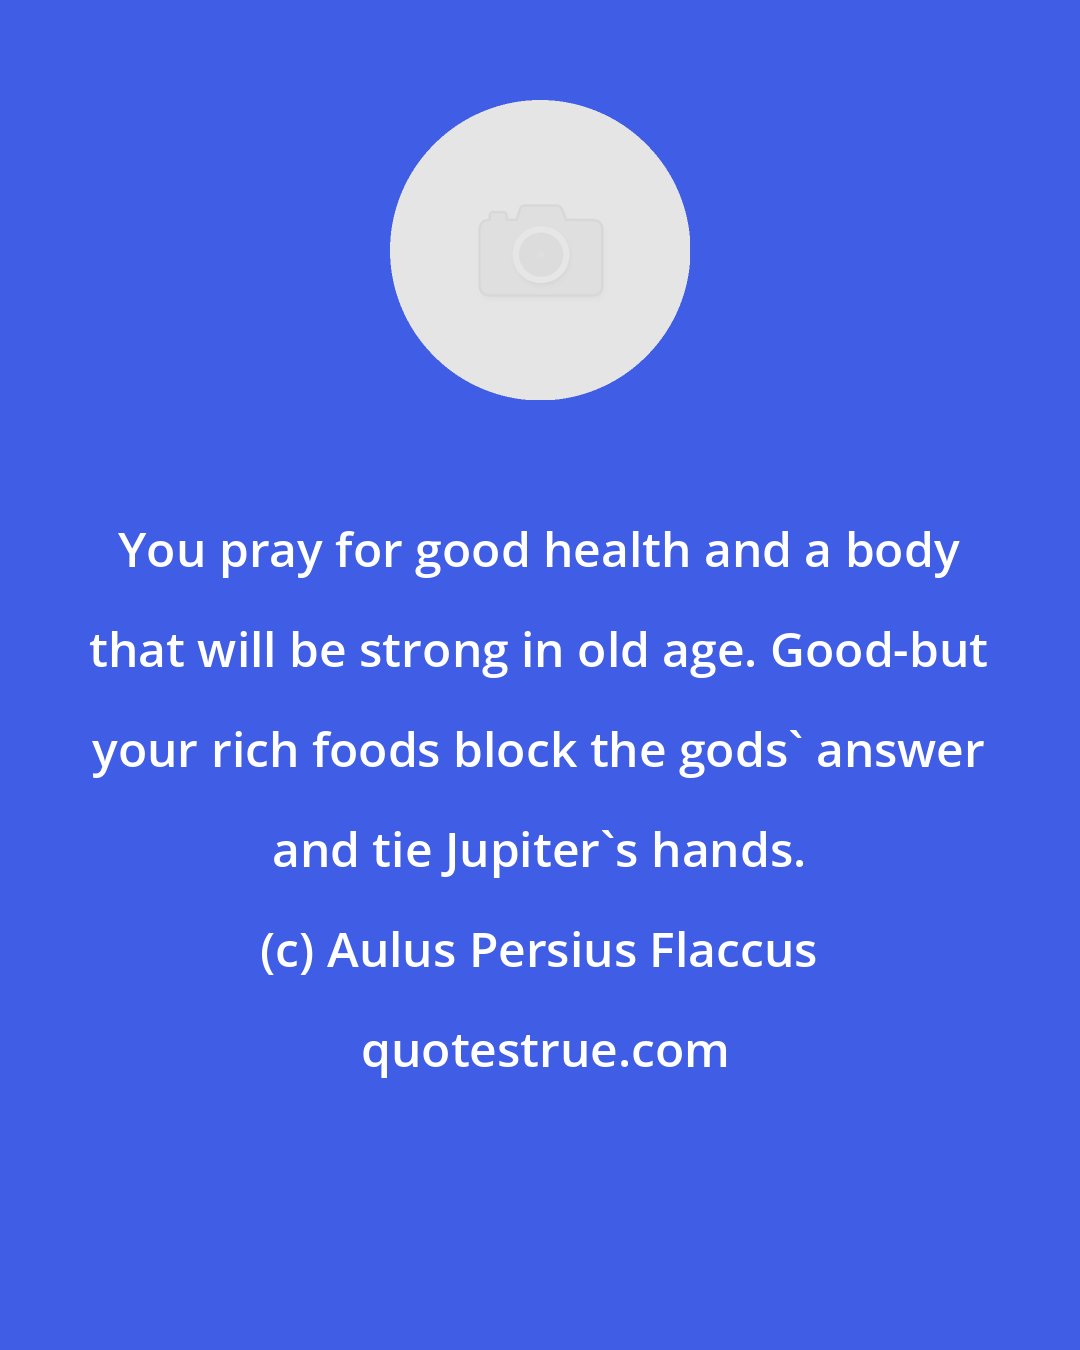 Aulus Persius Flaccus: You pray for good health and a body that will be strong in old age. Good-but your rich foods block the gods' answer and tie Jupiter's hands.